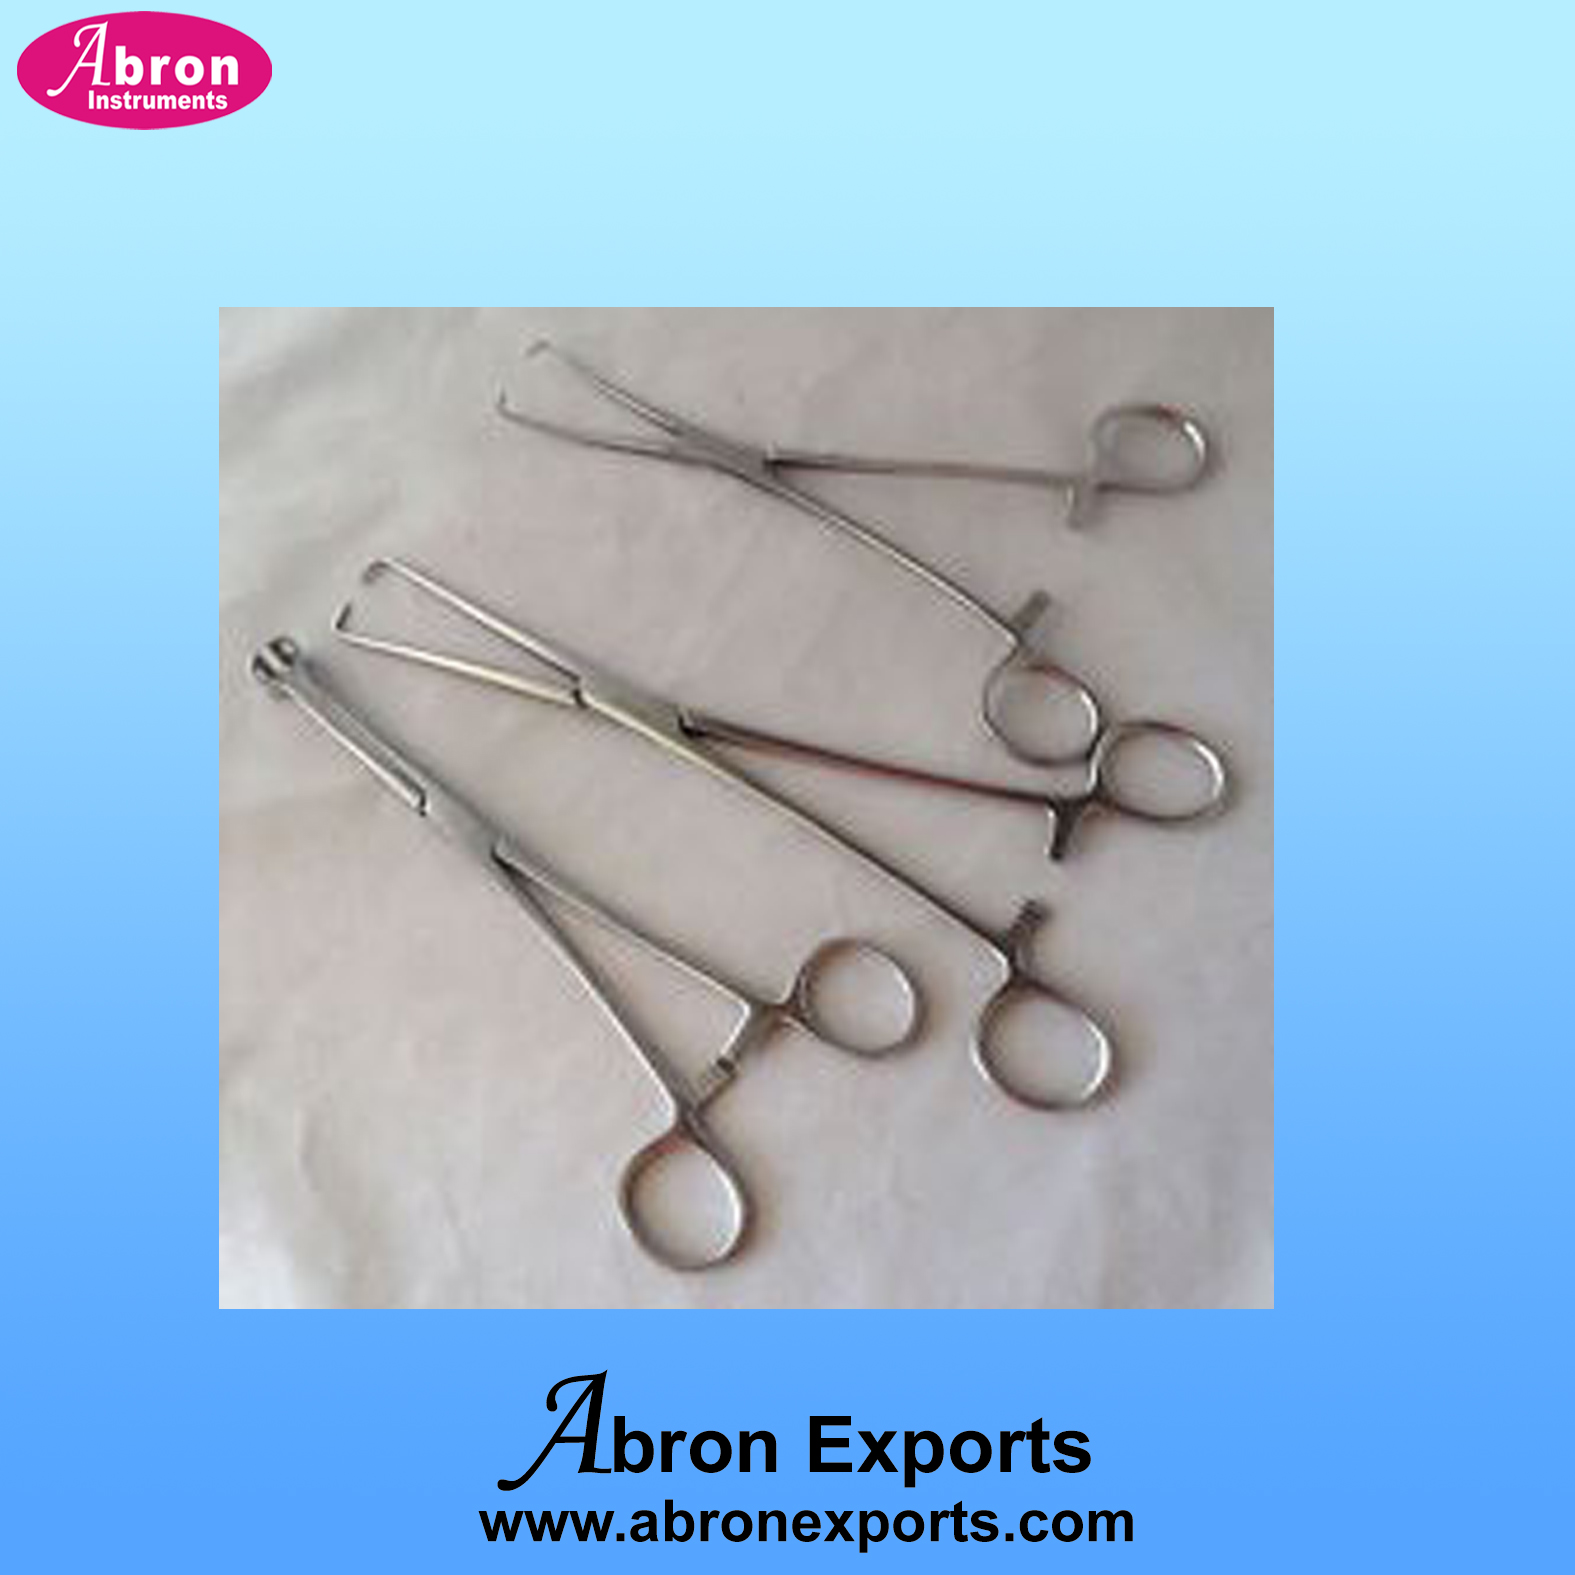 Surgical abron forceps stainless steel Taenaculum ABM-2620-30 